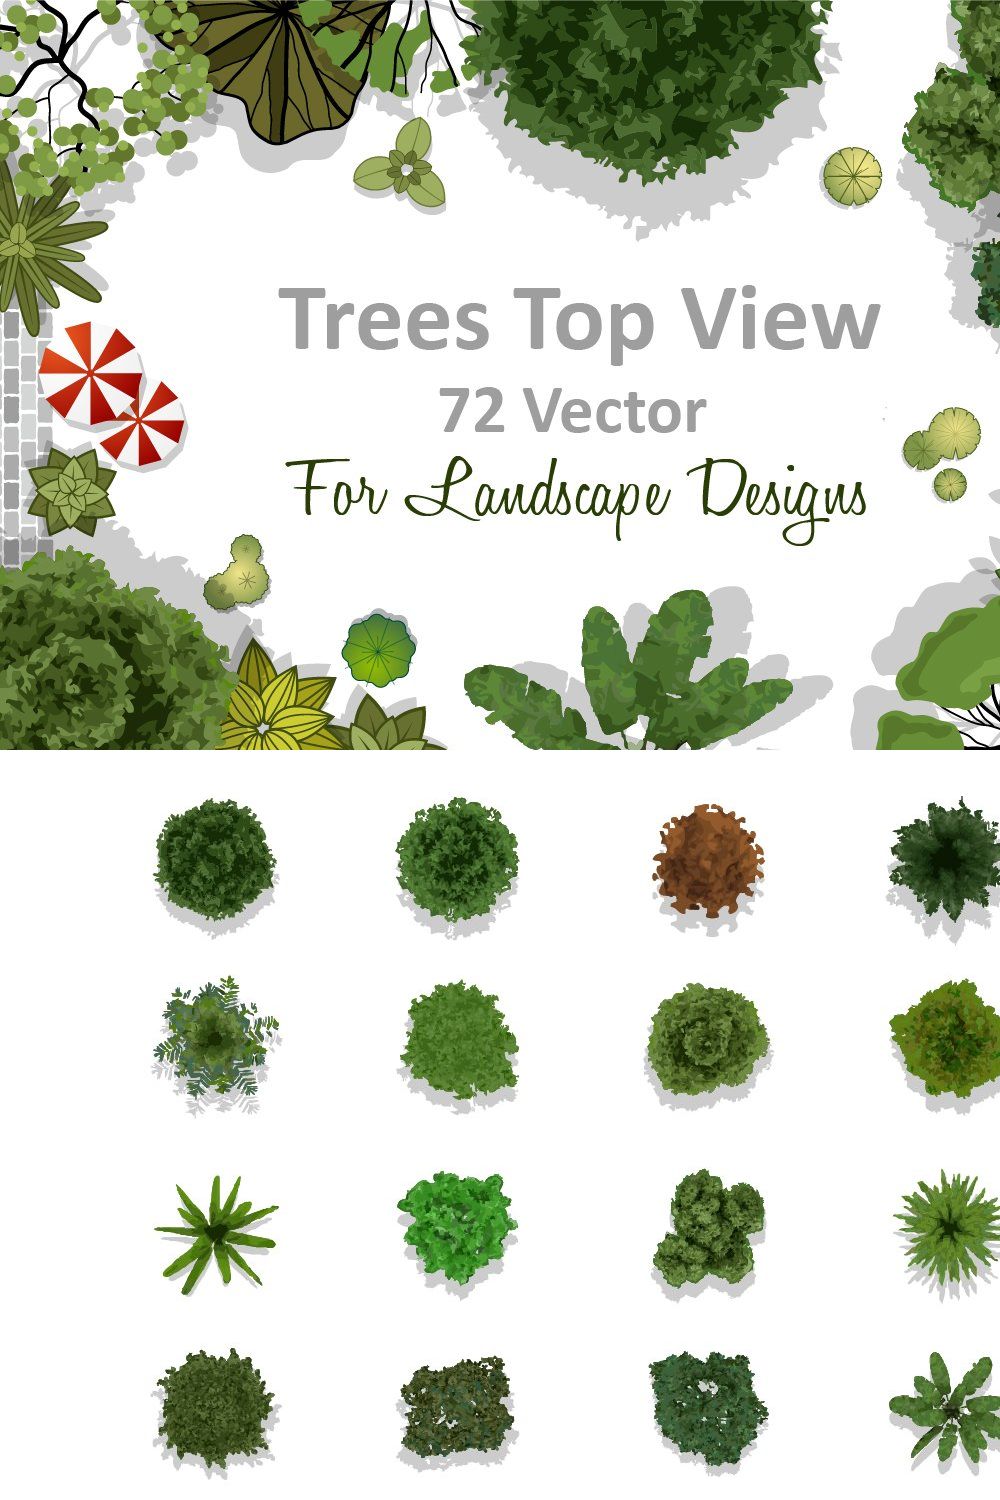 72 Vector Trees Top View pinterest preview image.